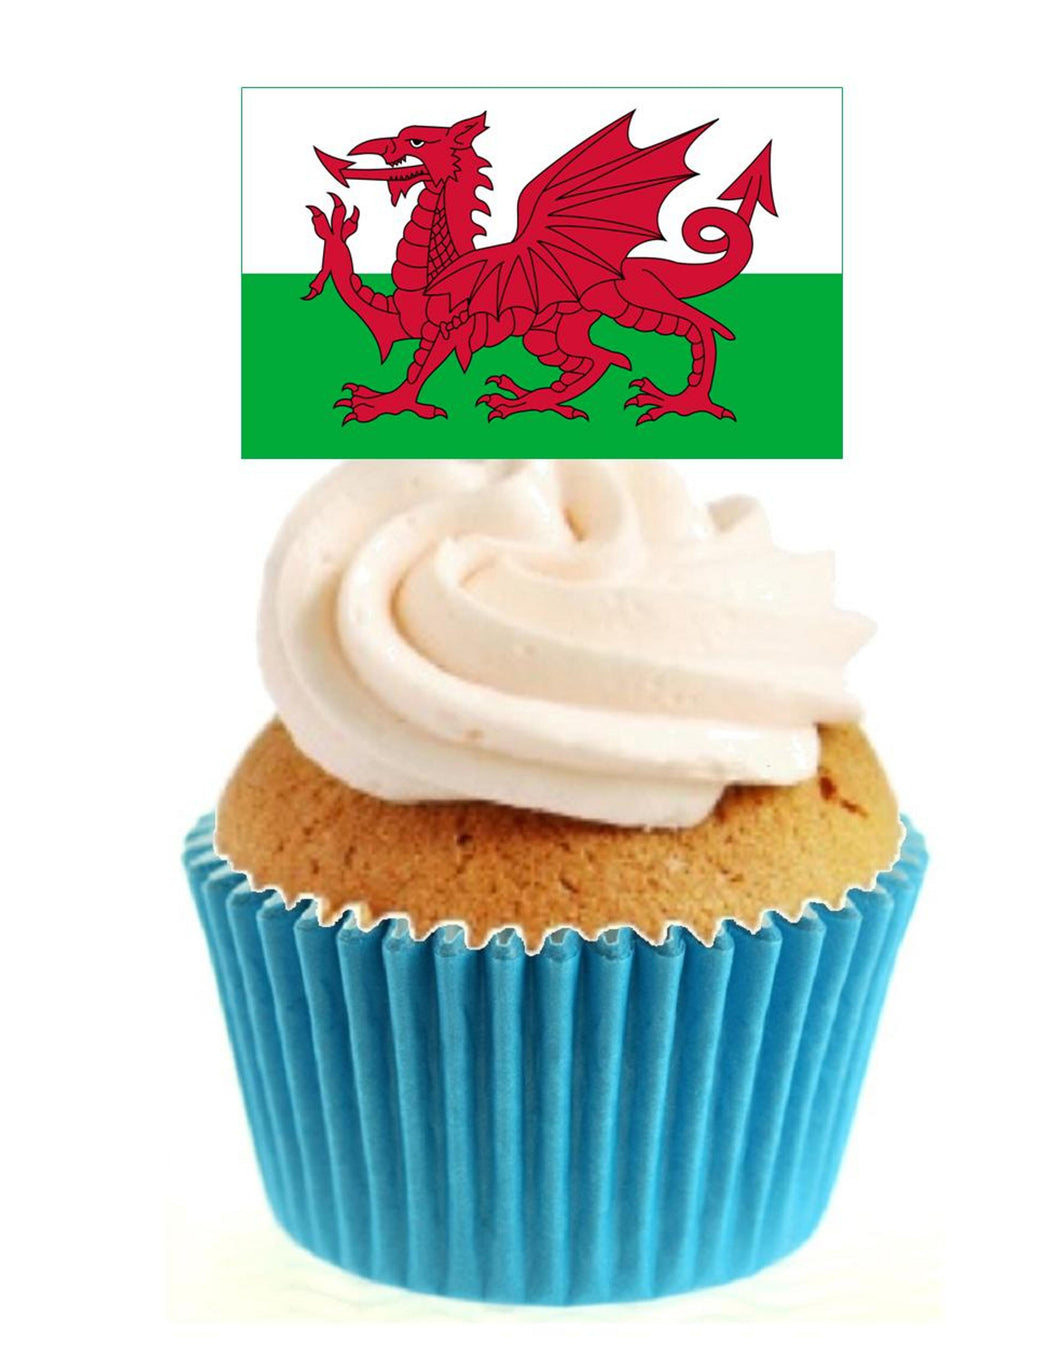 Welsh Flag Stand Up Cake Toppers (12 pack)